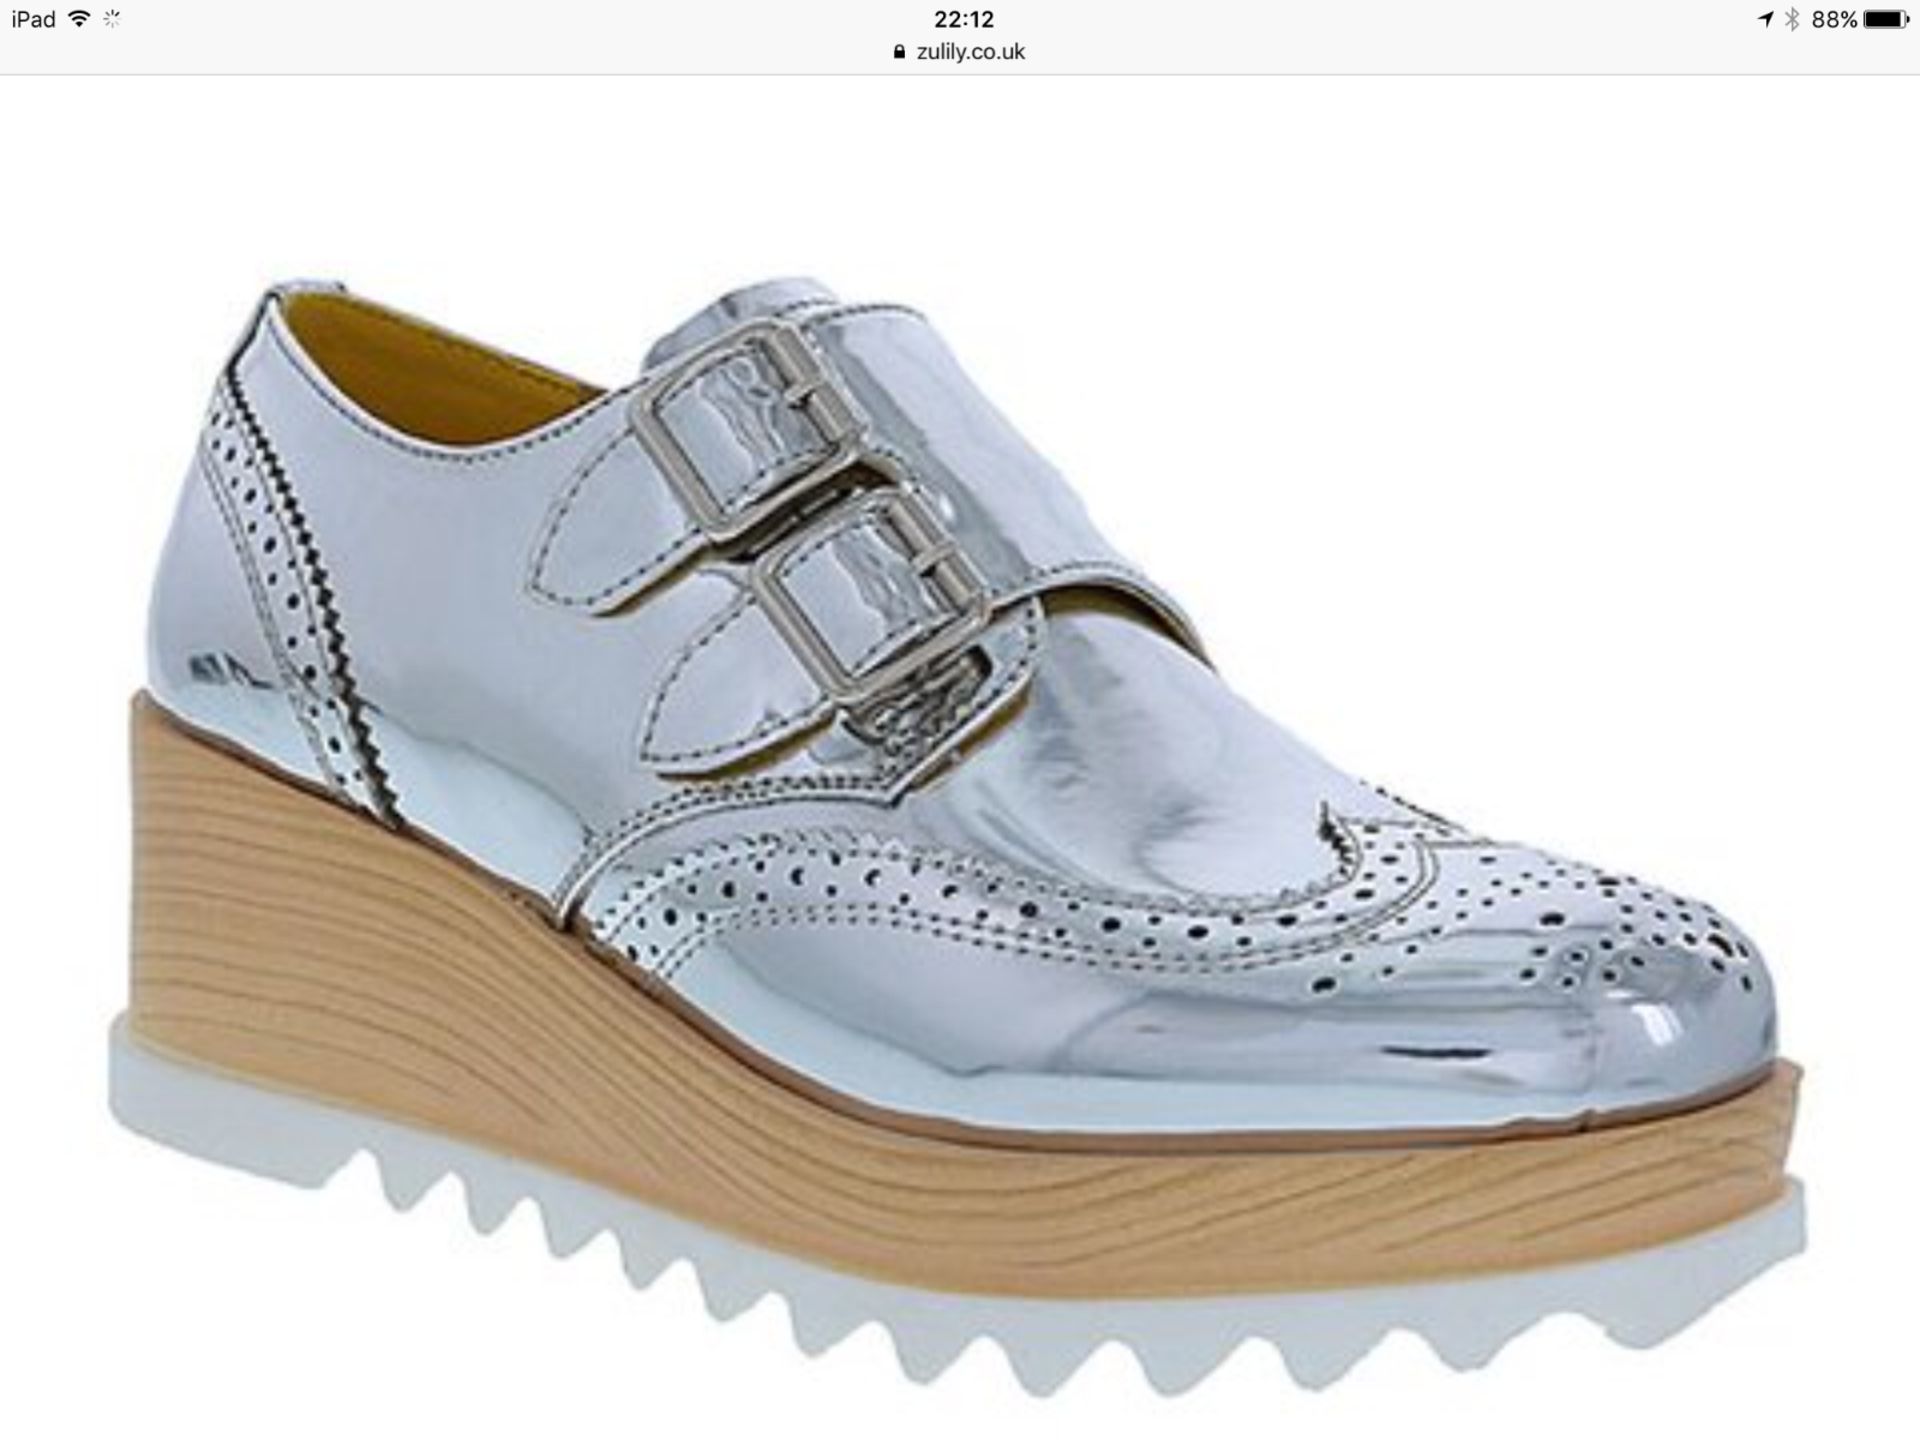 PINKY FOOTWEAR Silver Frida Platform Oxford, Size US 10/Eur 40/UK 7, RRP £57.99 (New with box) [Ref: - Image 2 of 4